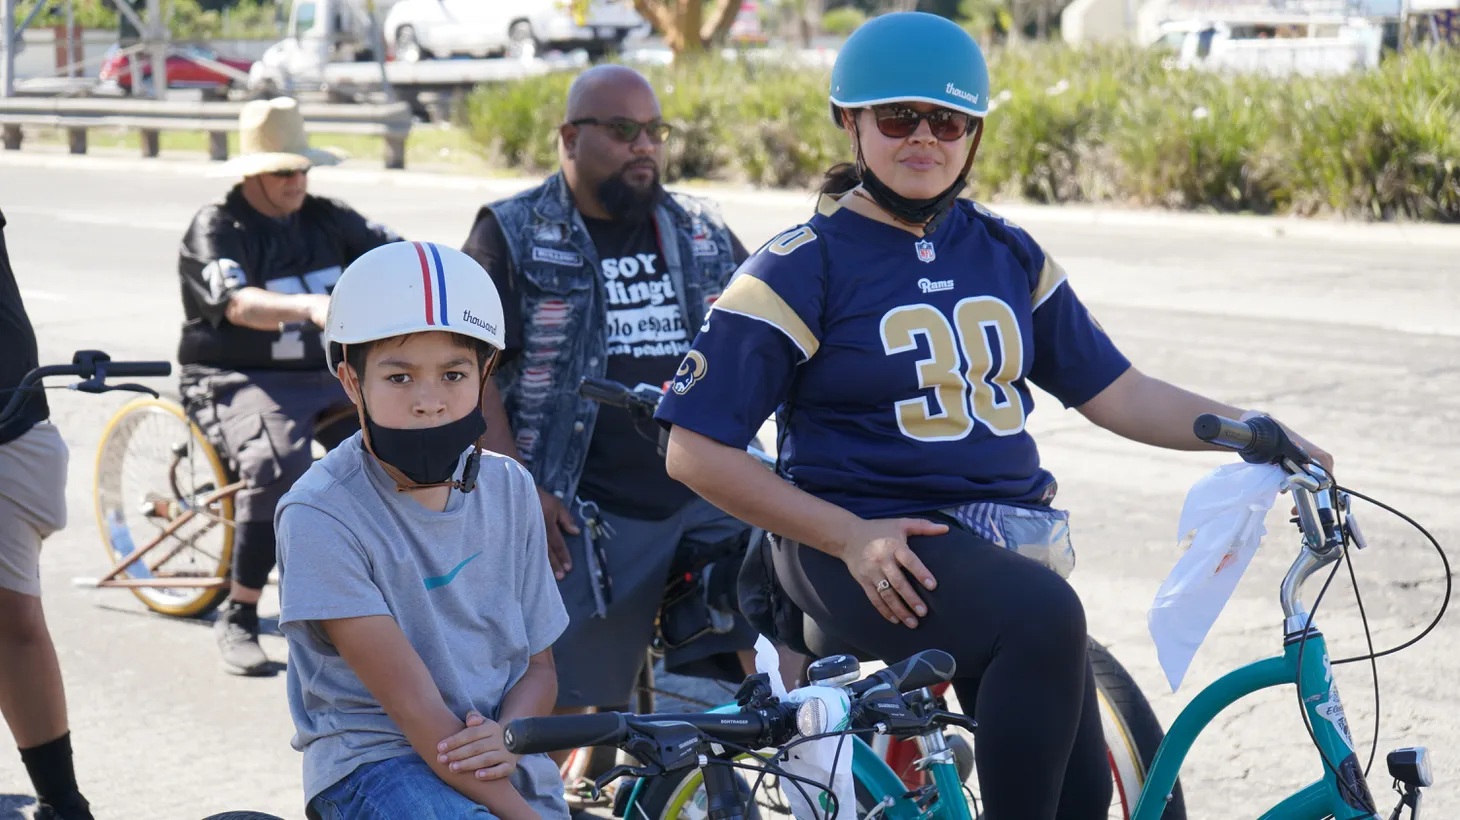 Members of East Side Riders can enjoy regular events for kids and families.